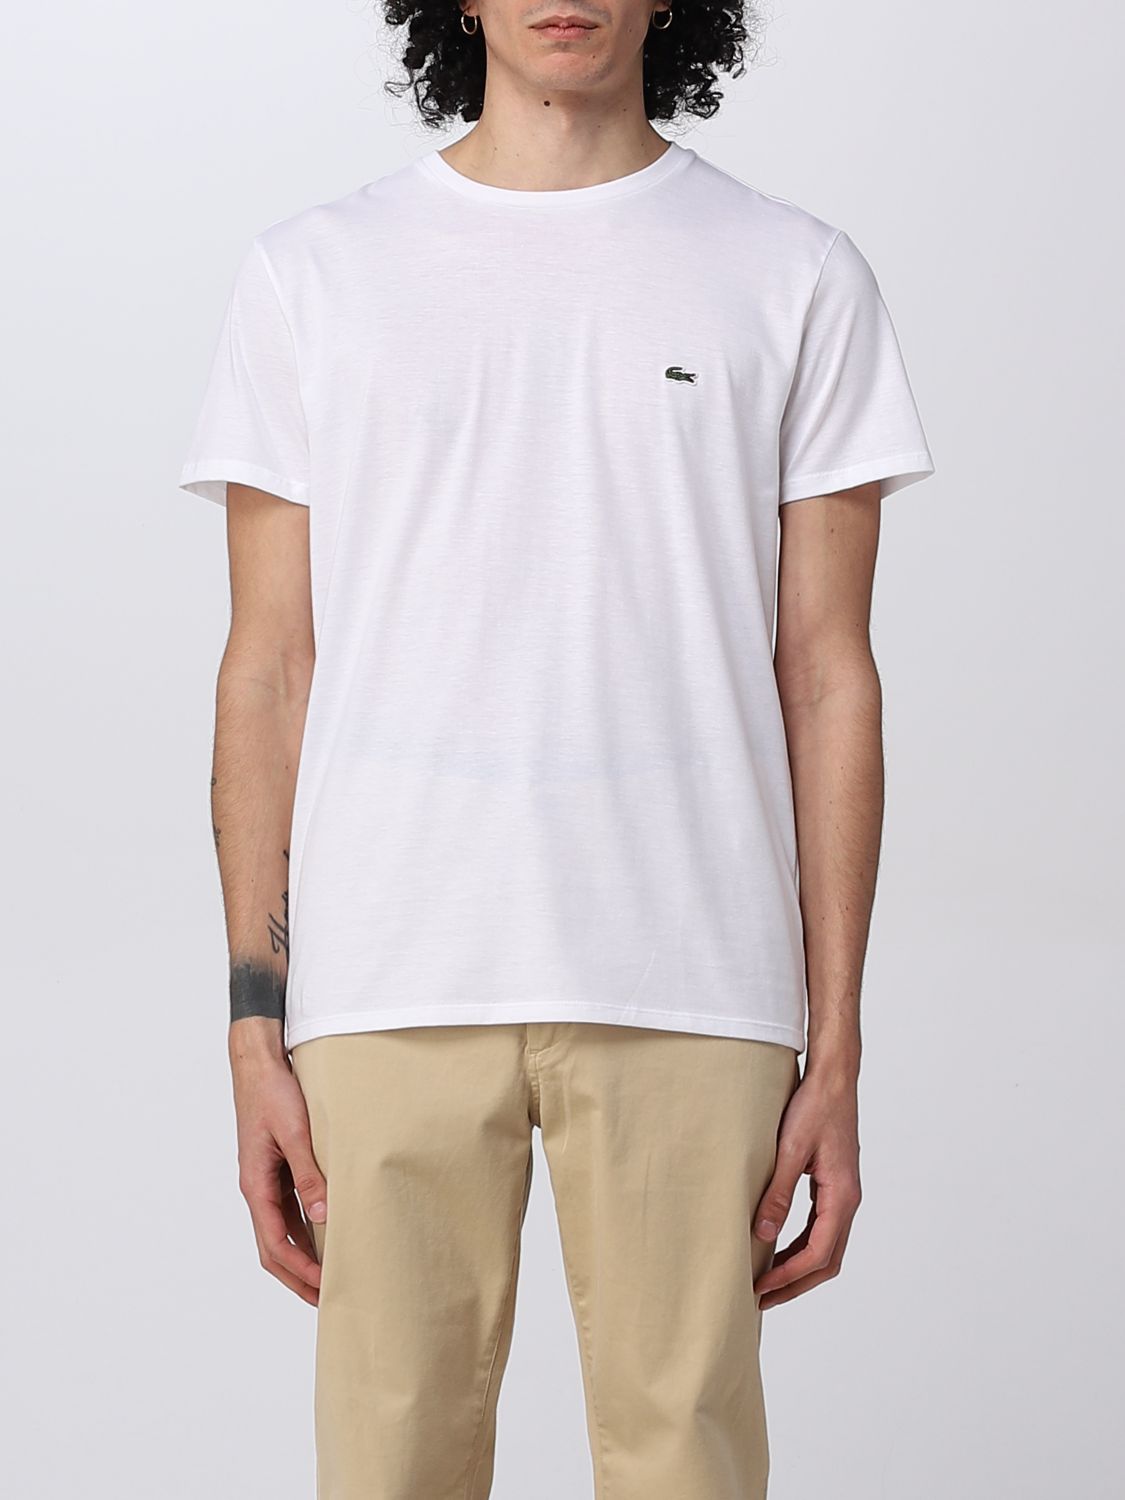 LACOSTE: t-shirt for man - White | Lacoste t-shirt TH6709 online on ...